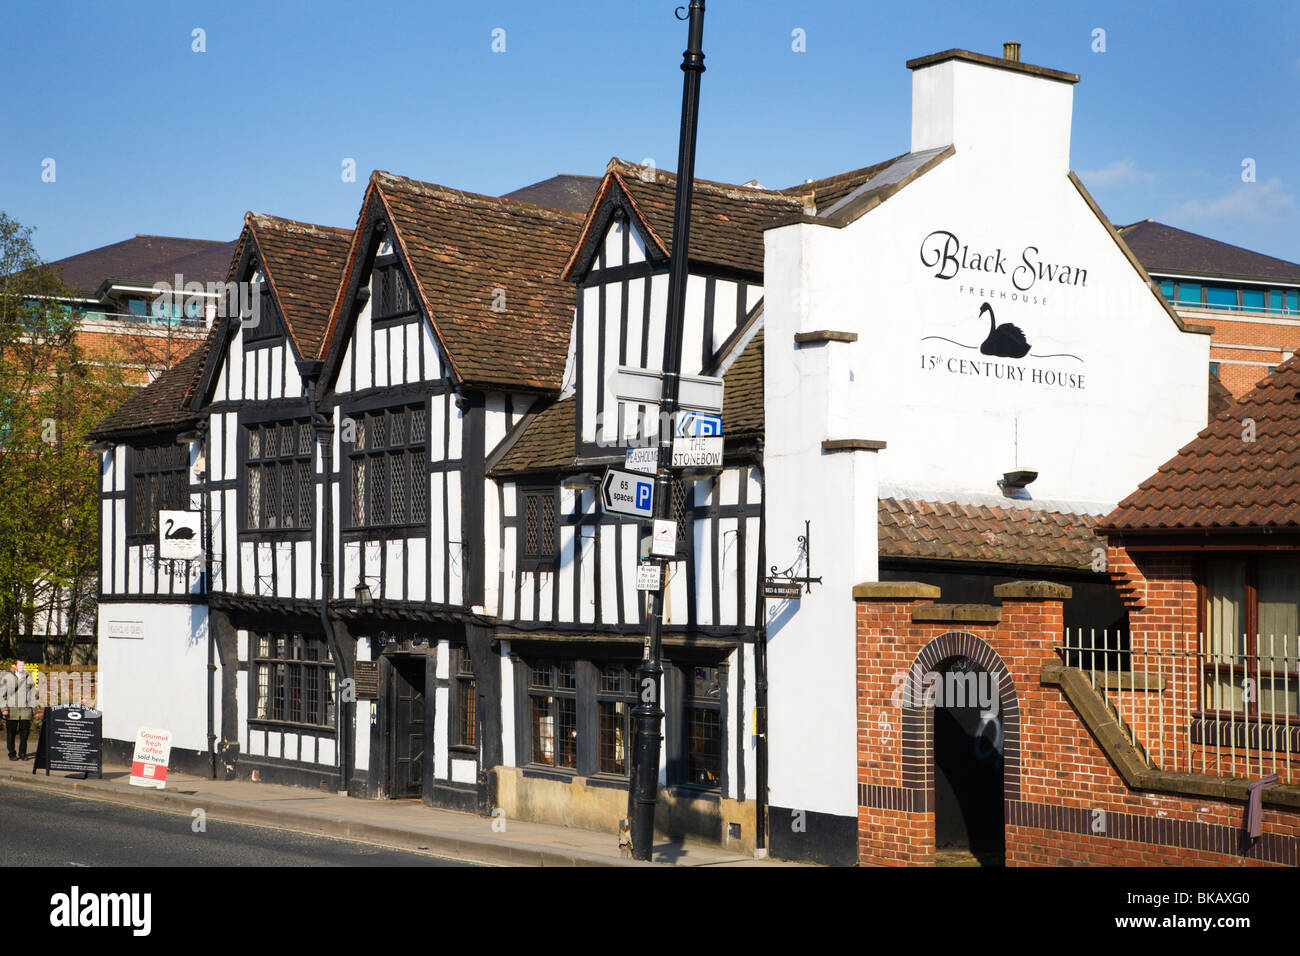 Old Black Swan Pub High Resolution Stock Photography and Images - Alamy